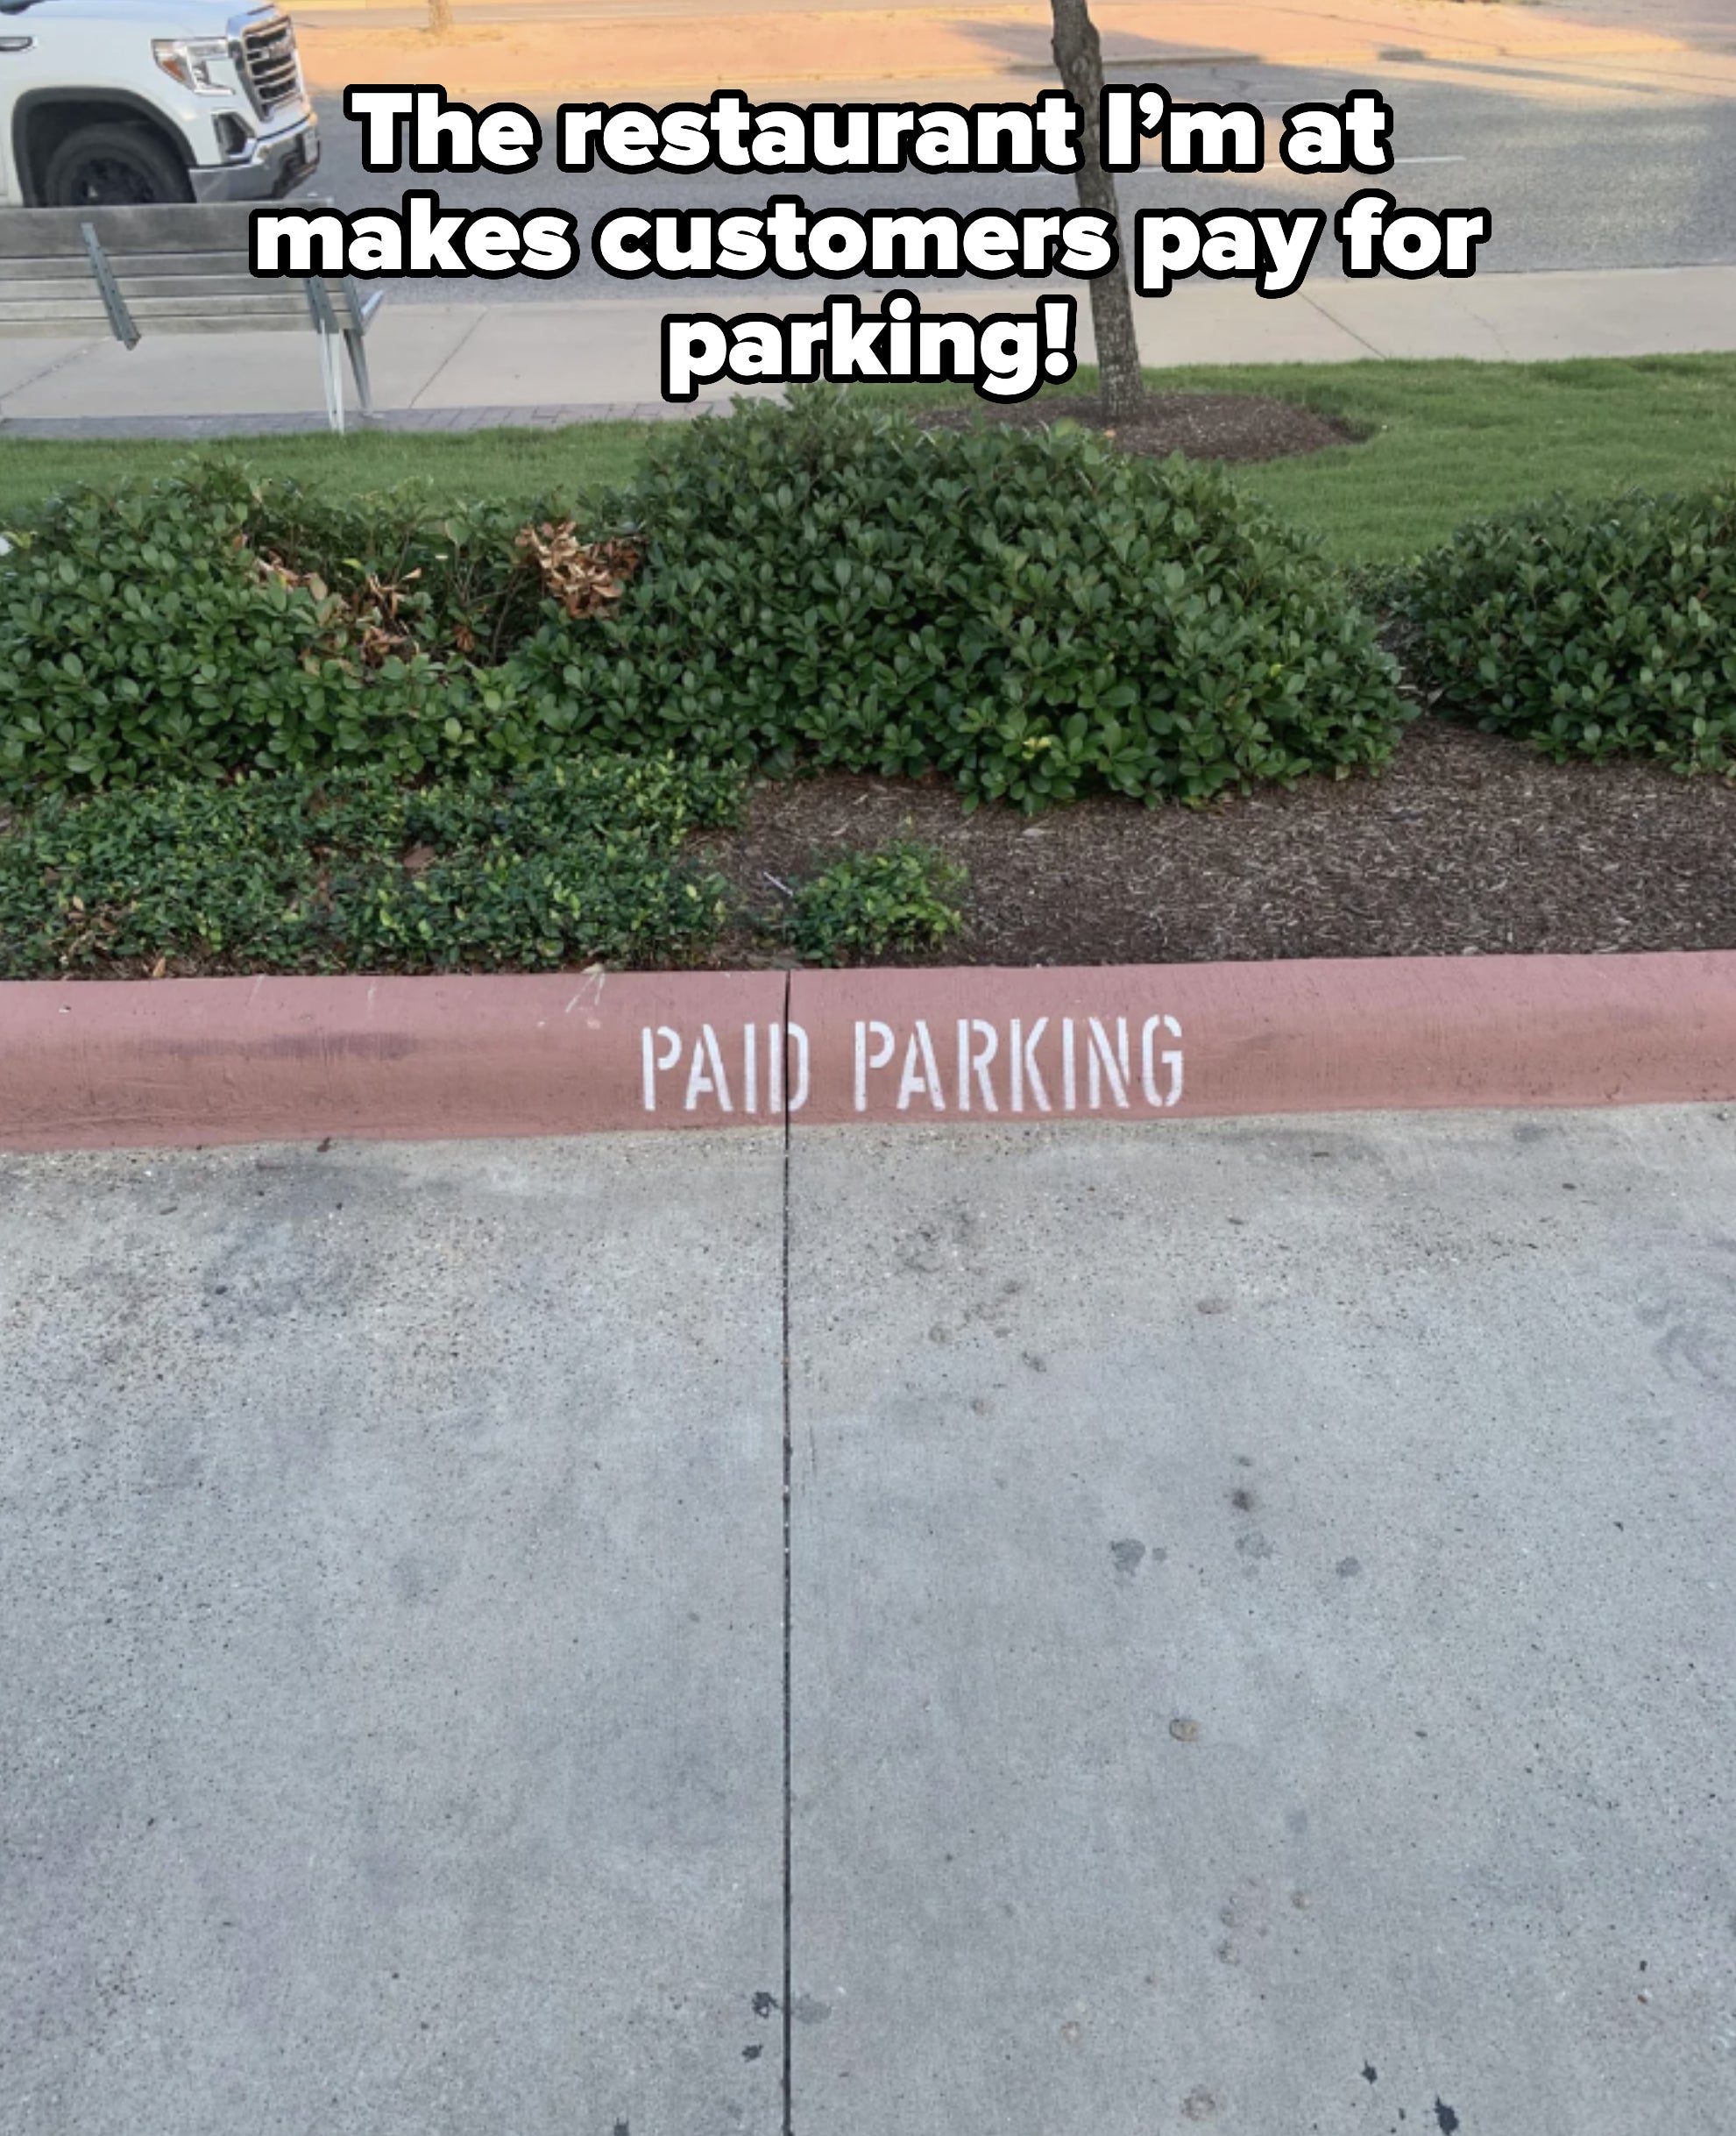 Curbside with the words &quot;PAID PARKING&quot; painted on the sidewalk, near shrubs and a parked white vehicle